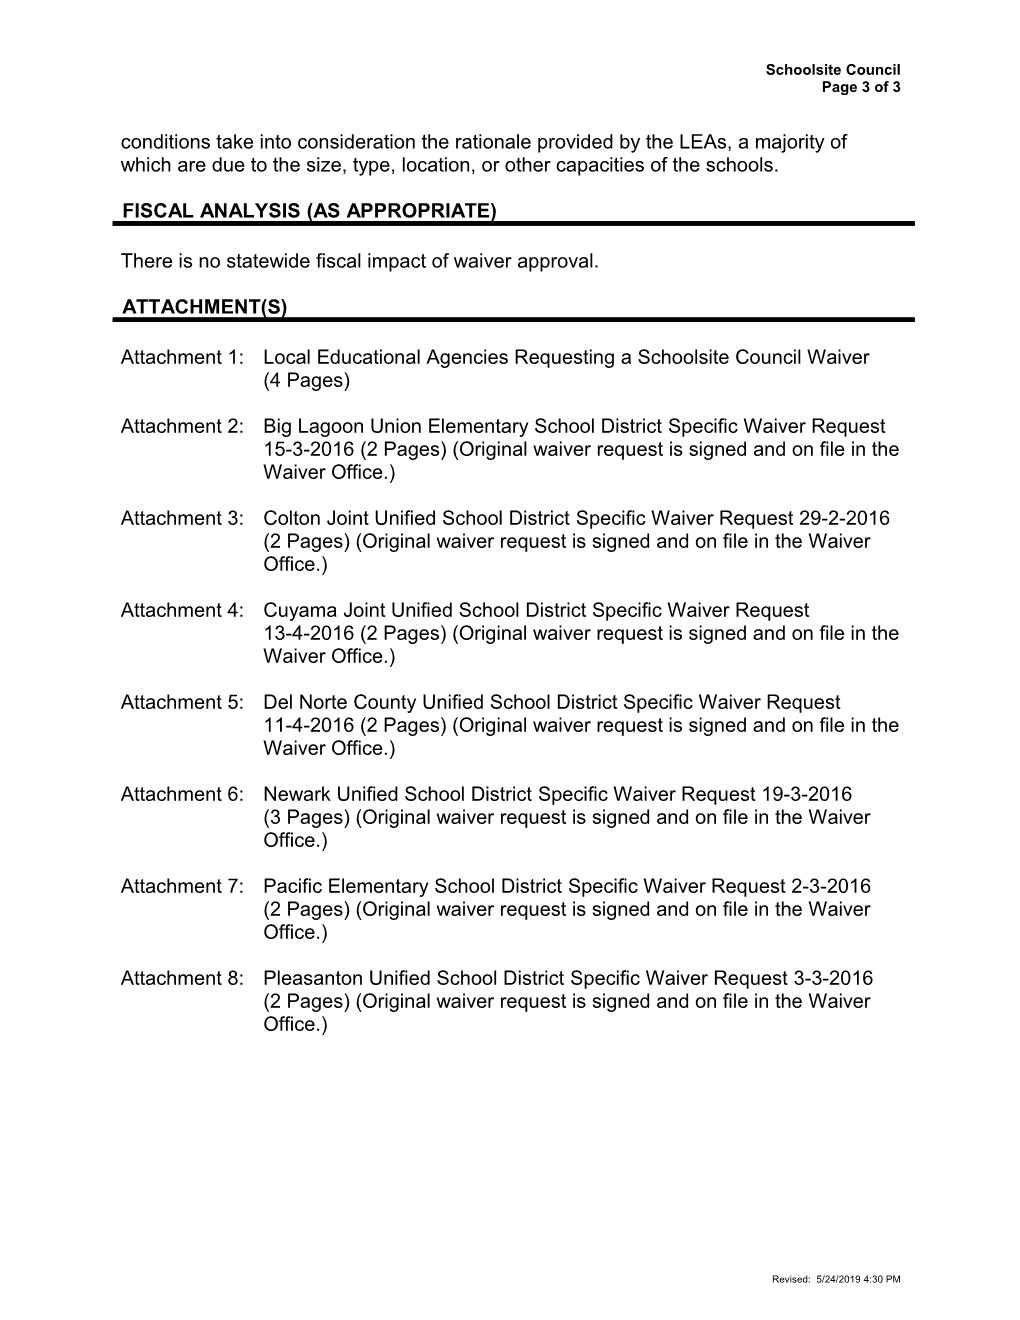 July 2016 Waiver Item W-14 - Meeting Agendas (CA State Board of Education)